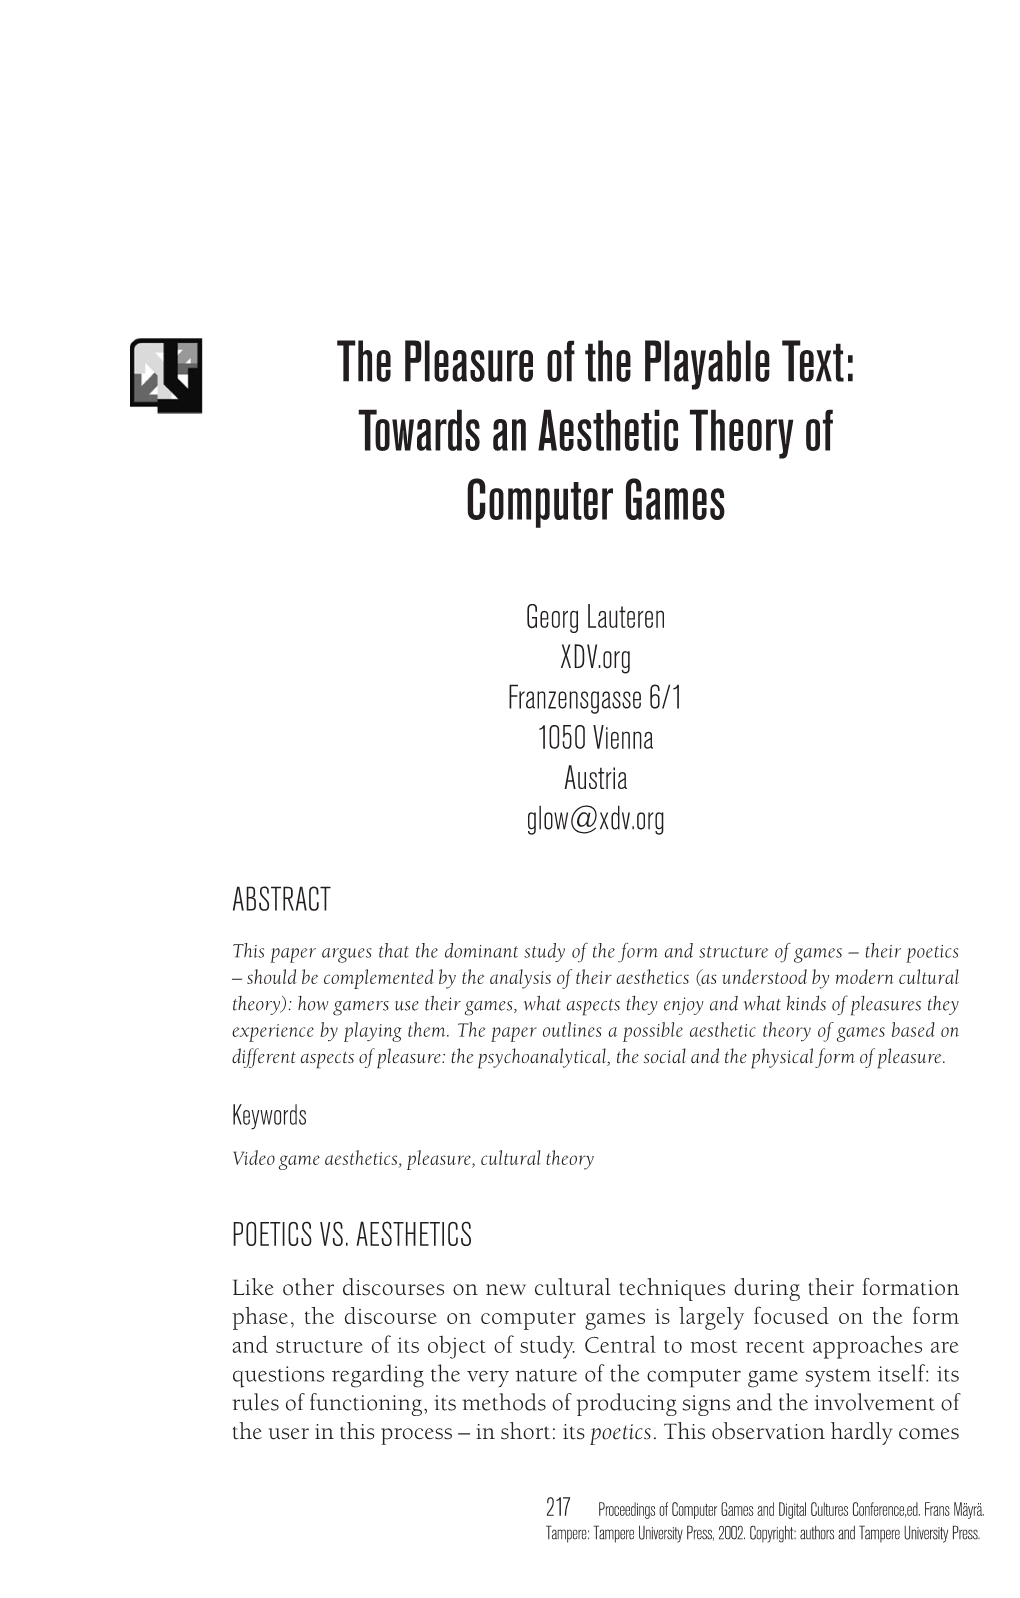 The Pleasure of the Playable Text: Towards an Aesthetic Theory of Computer Games